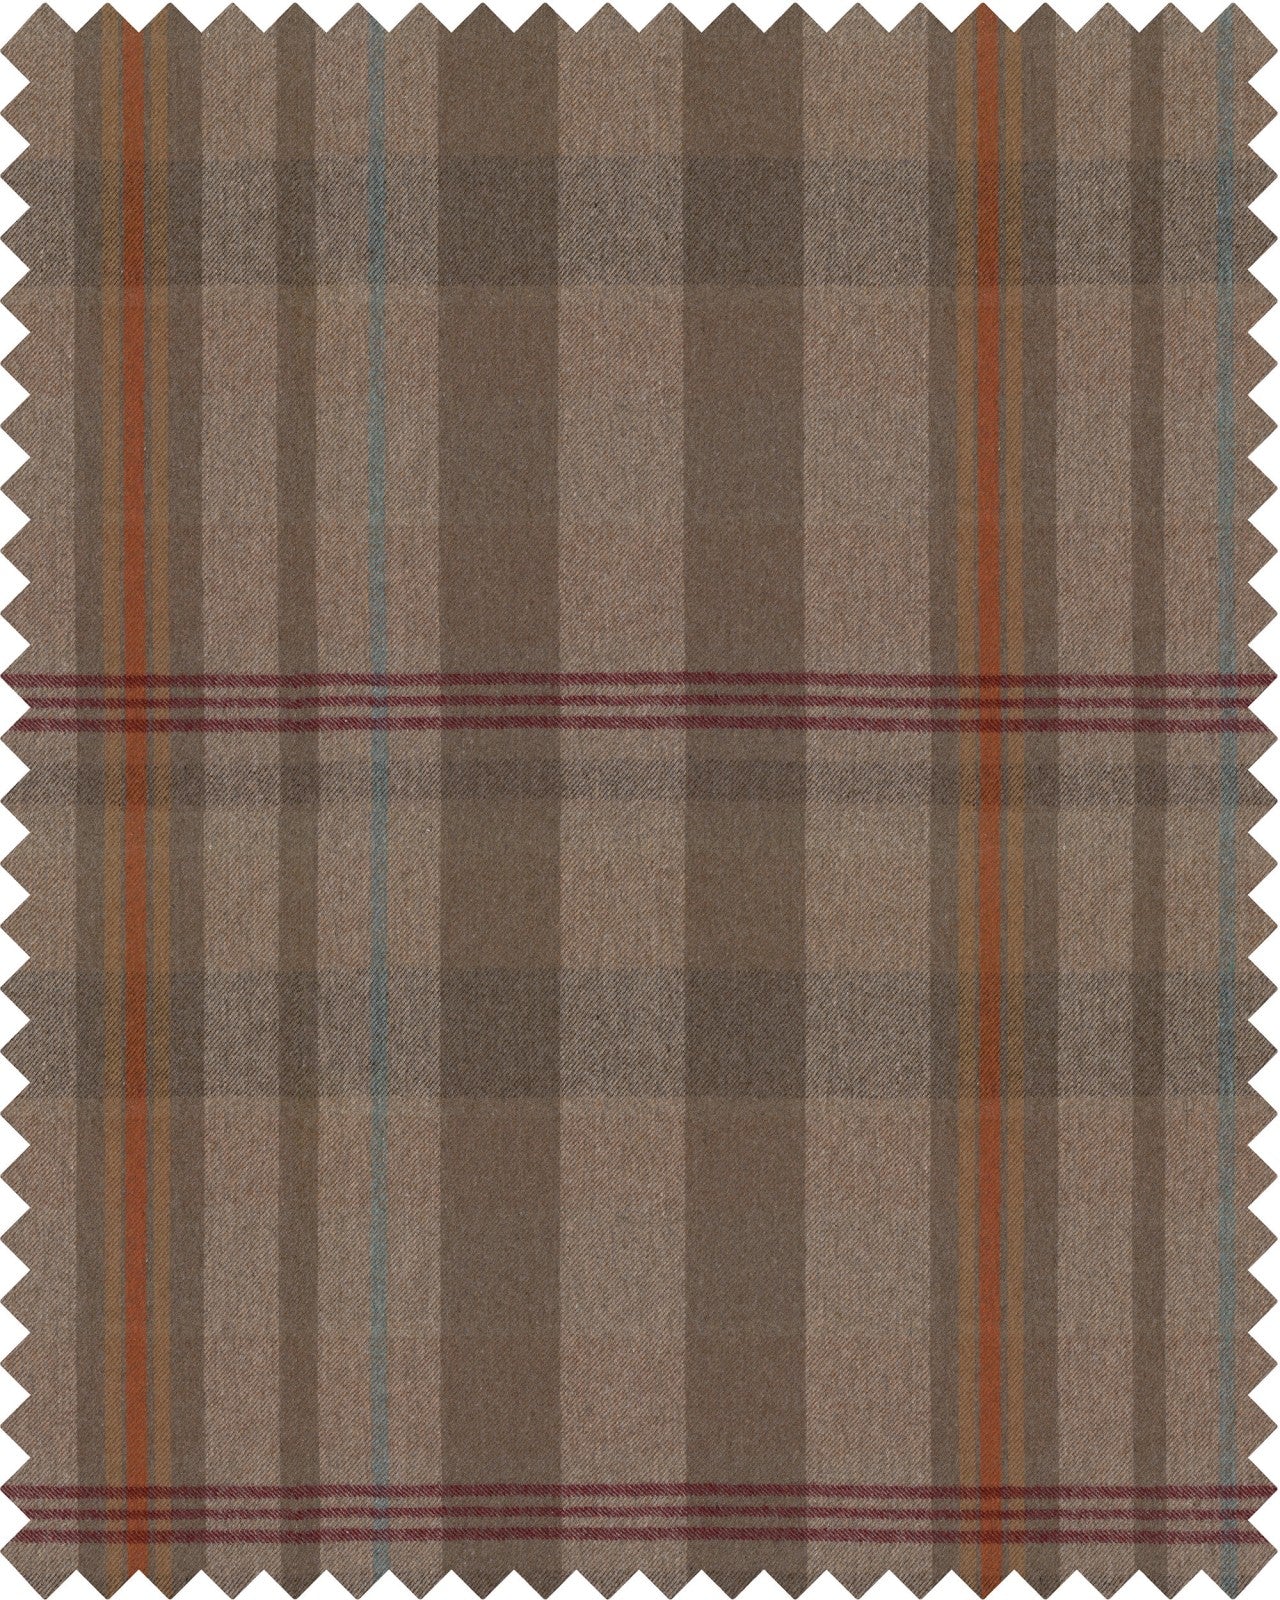 Chalet fabric in brown orange taupe mint color - pattern number FB00116 - by Mind The Gap in the Tyrol Apres-ski Home Collection collection